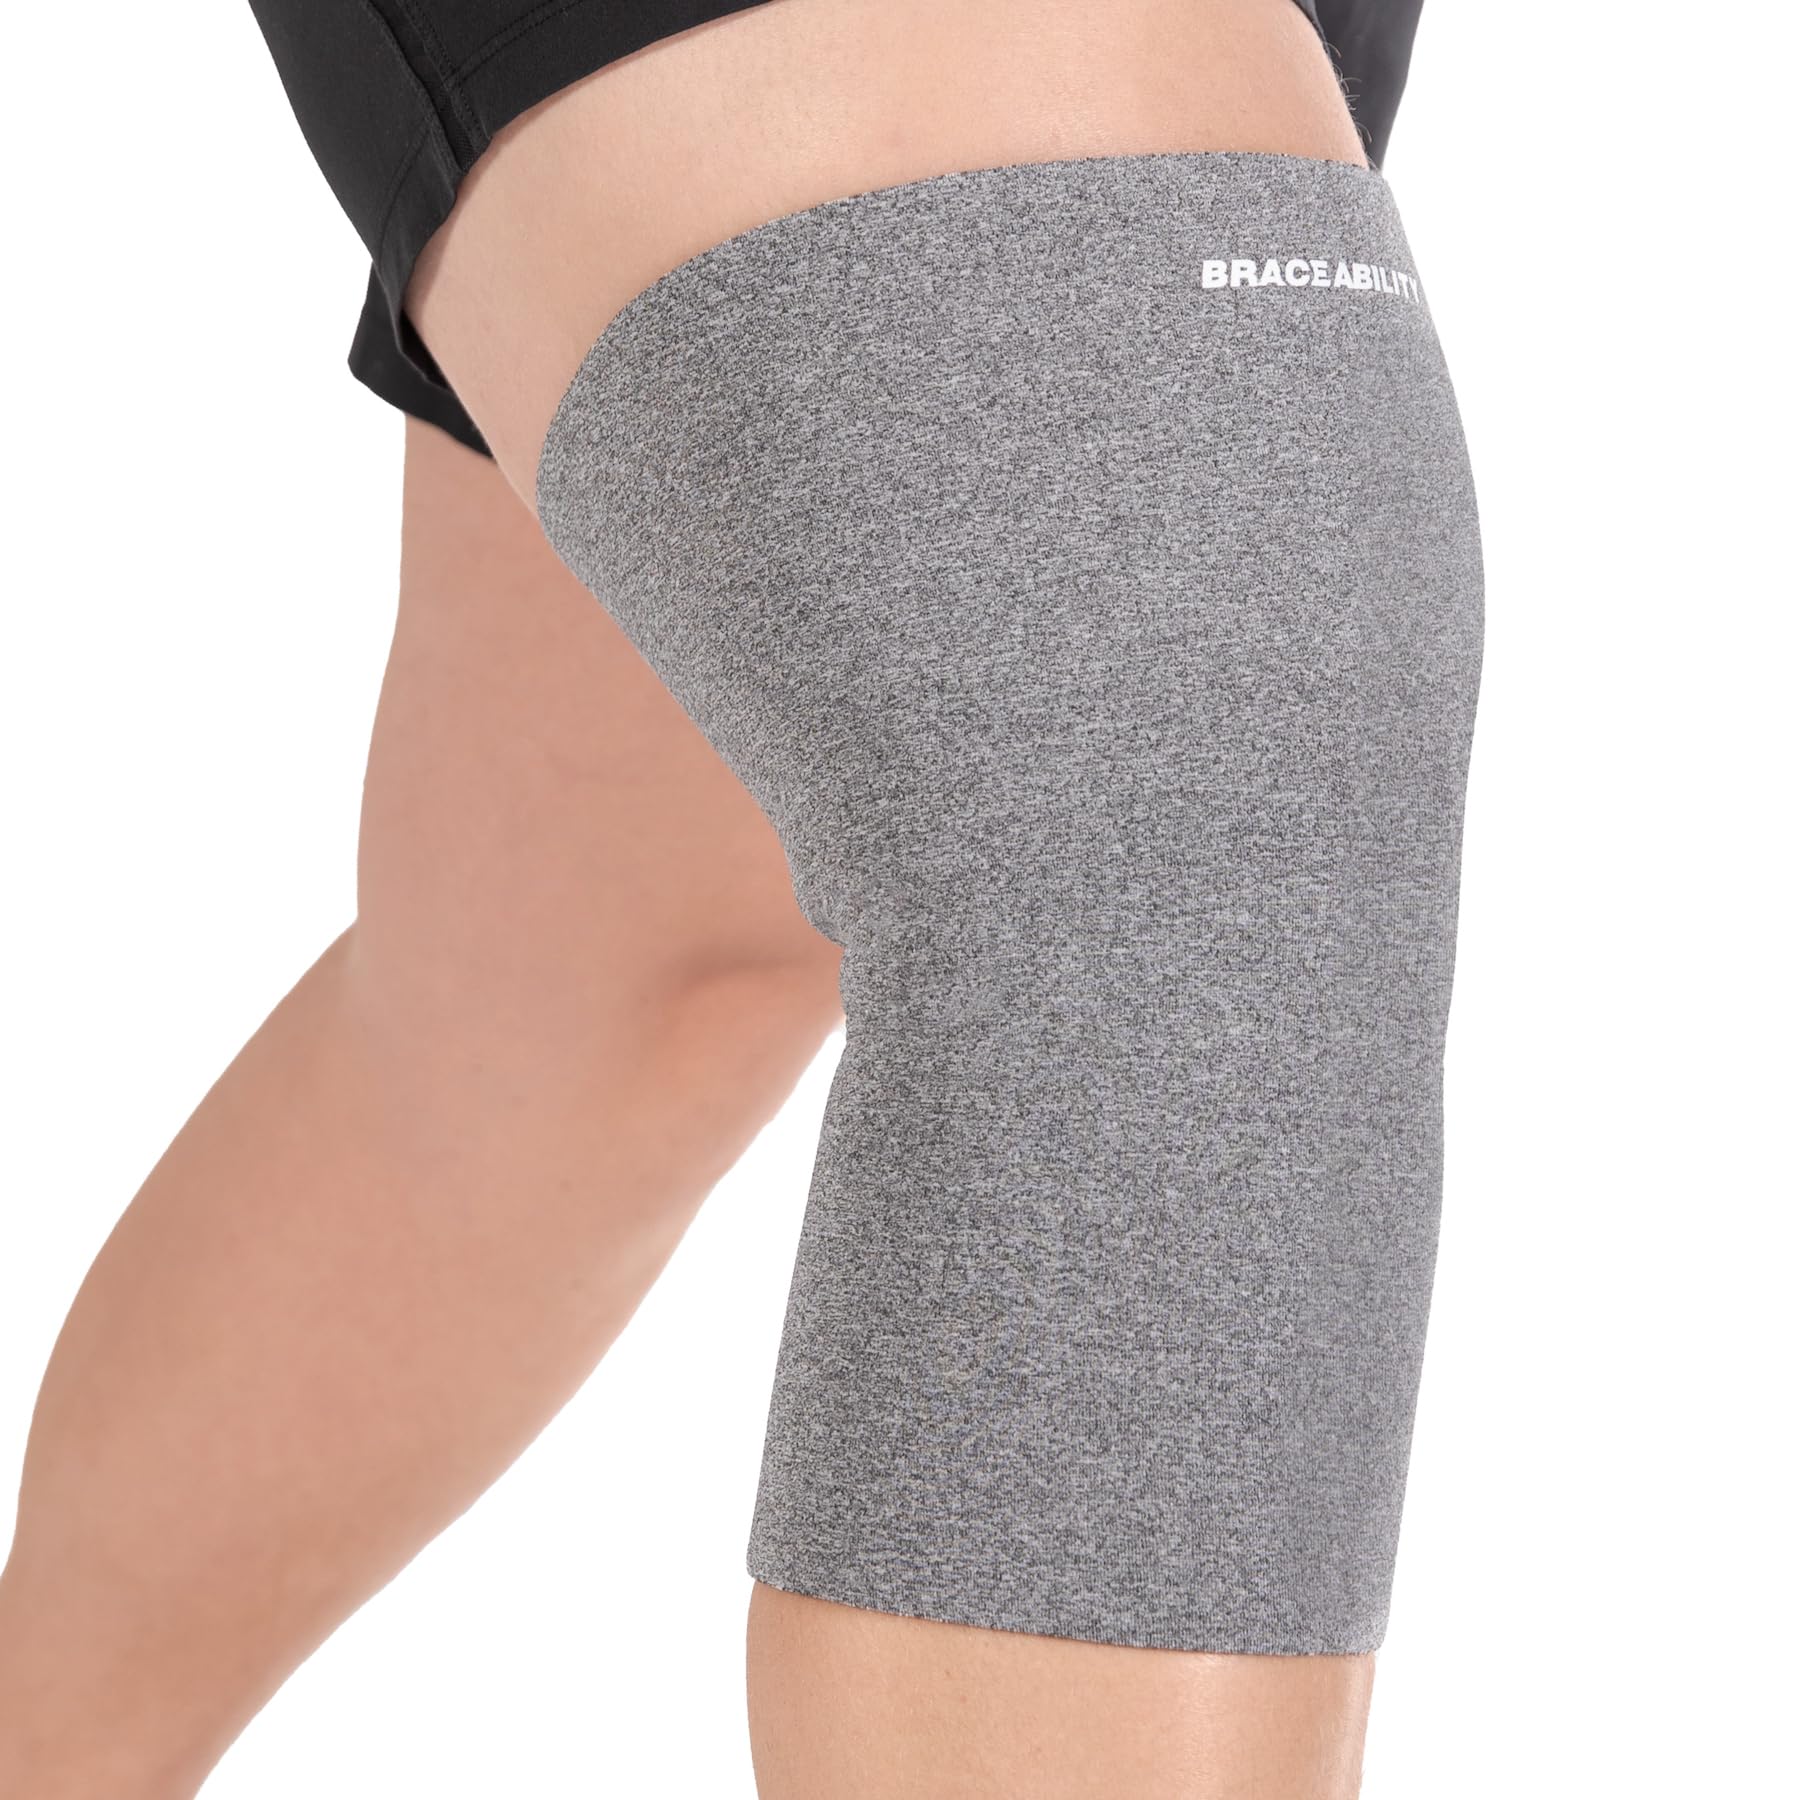 BraceAbility Plus Size Neoprene Knee Sleeve - Knee Compression Sleeve for Large Legs and Big Thighs, Arthritis Joint Pain Support Knee Brace for Obese - Fits Men and Women (3XL Wide Calf - Gray)